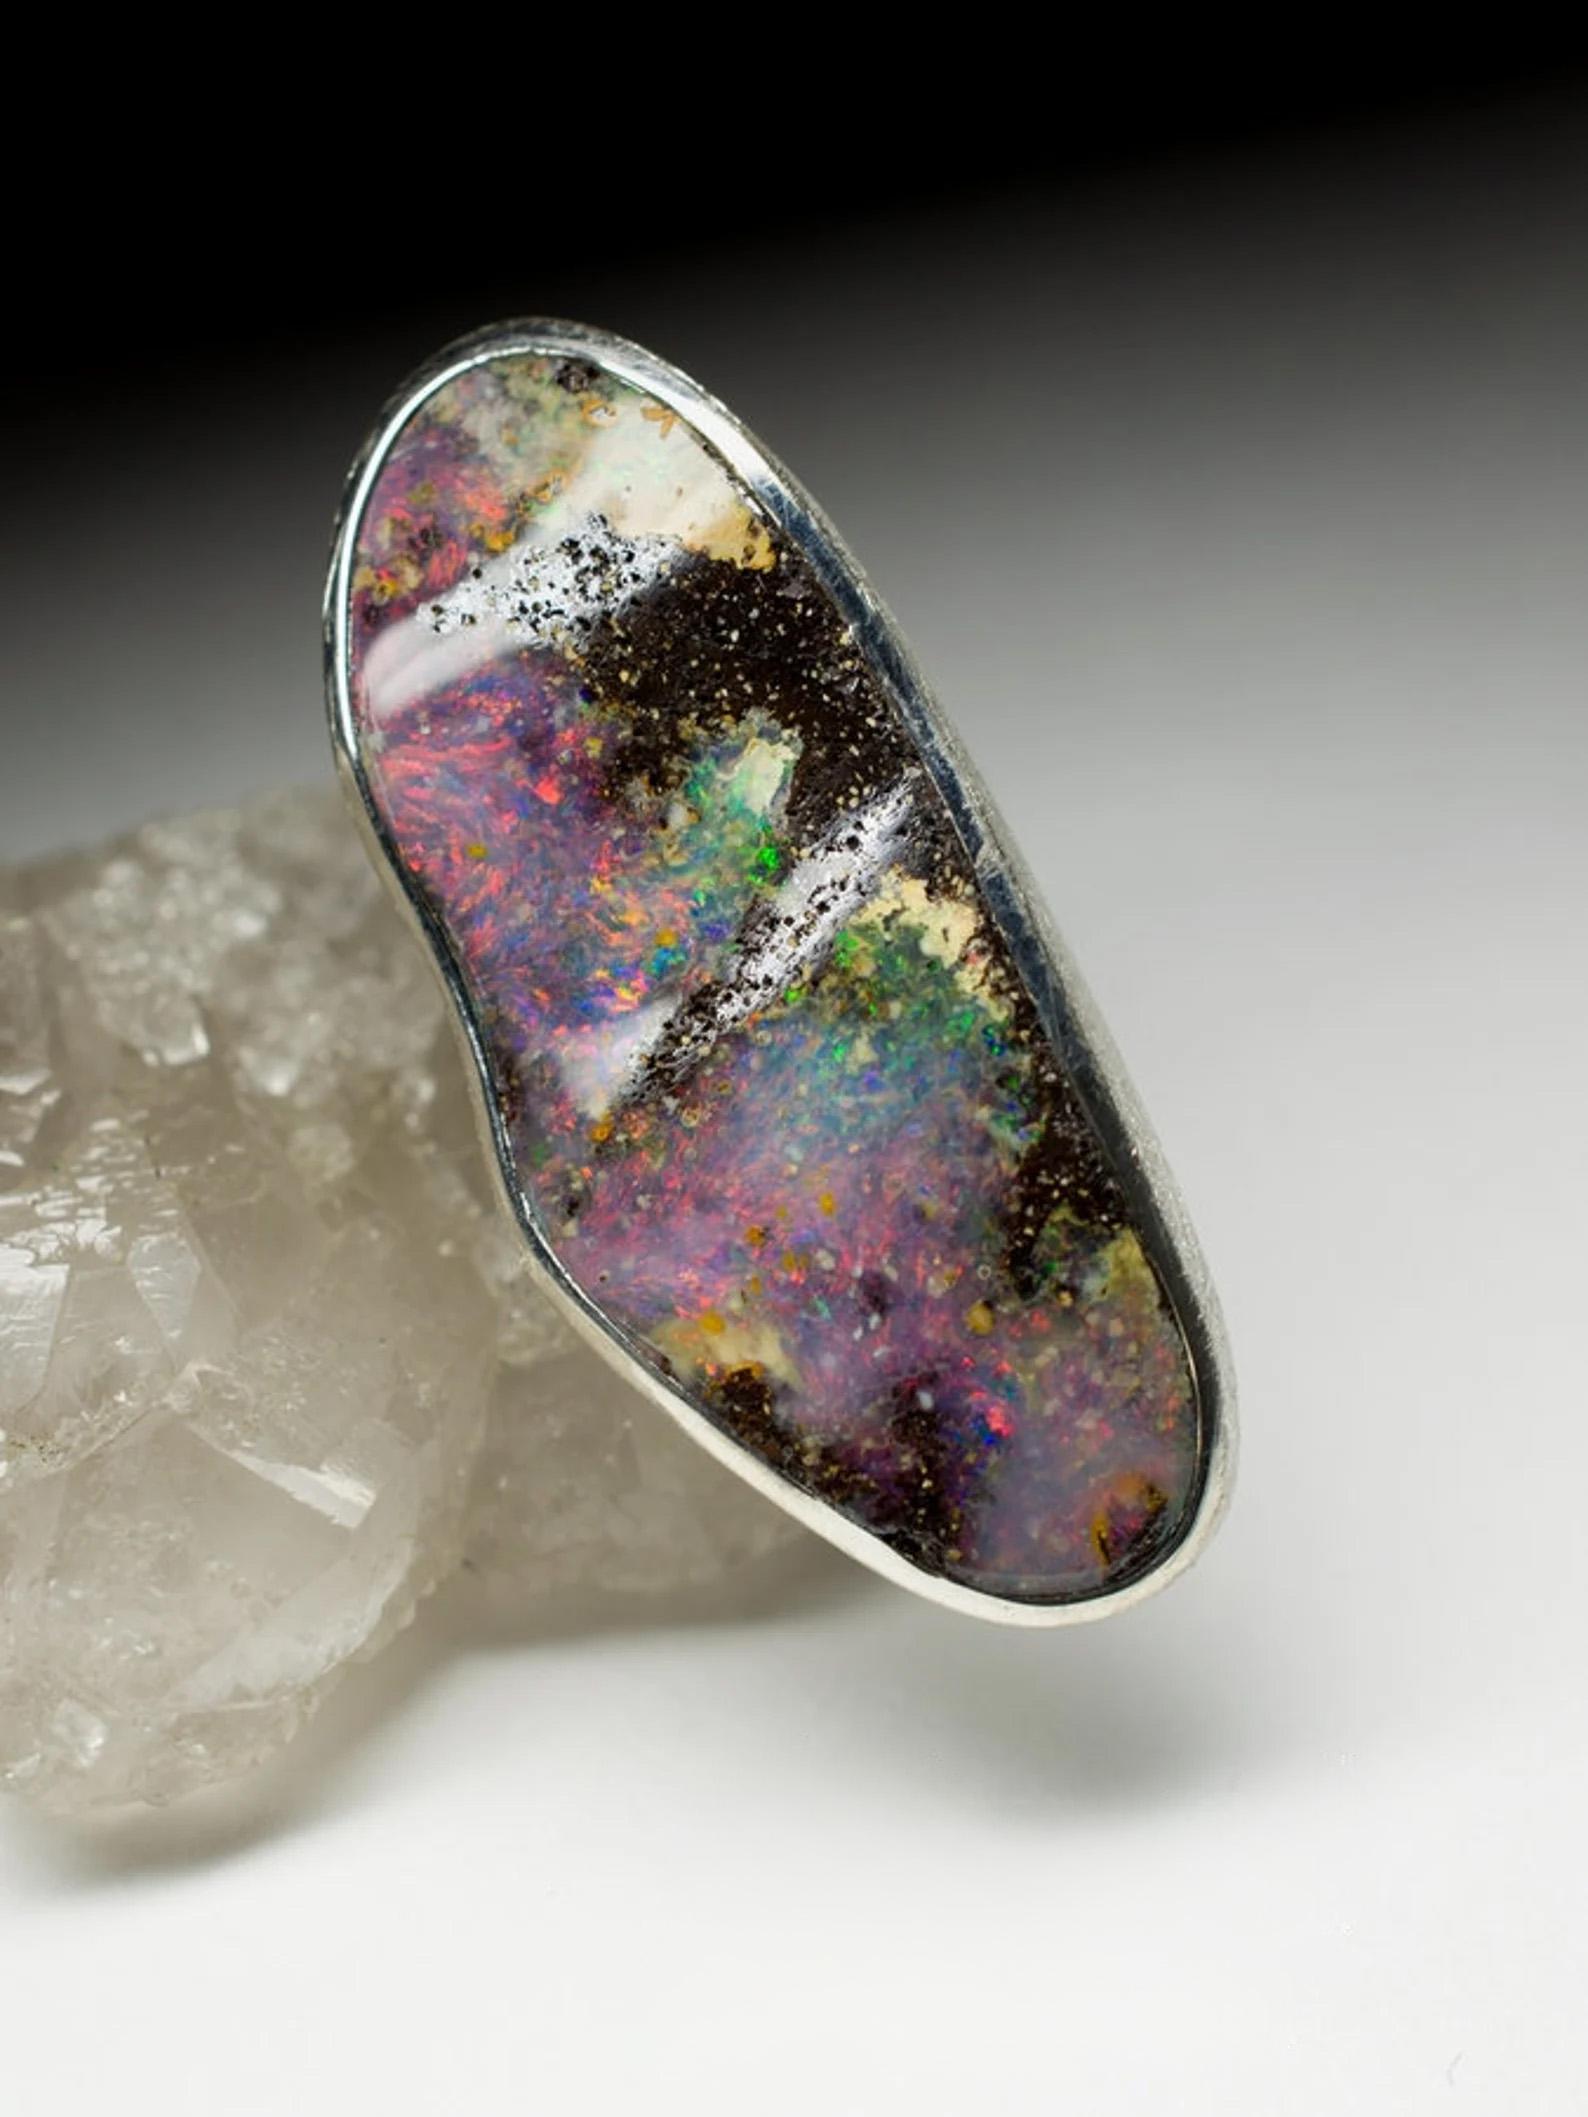 Oval Cut Large Boulder Opal Ring Natural Polychrome Space Dust Purple Pink Gemstone